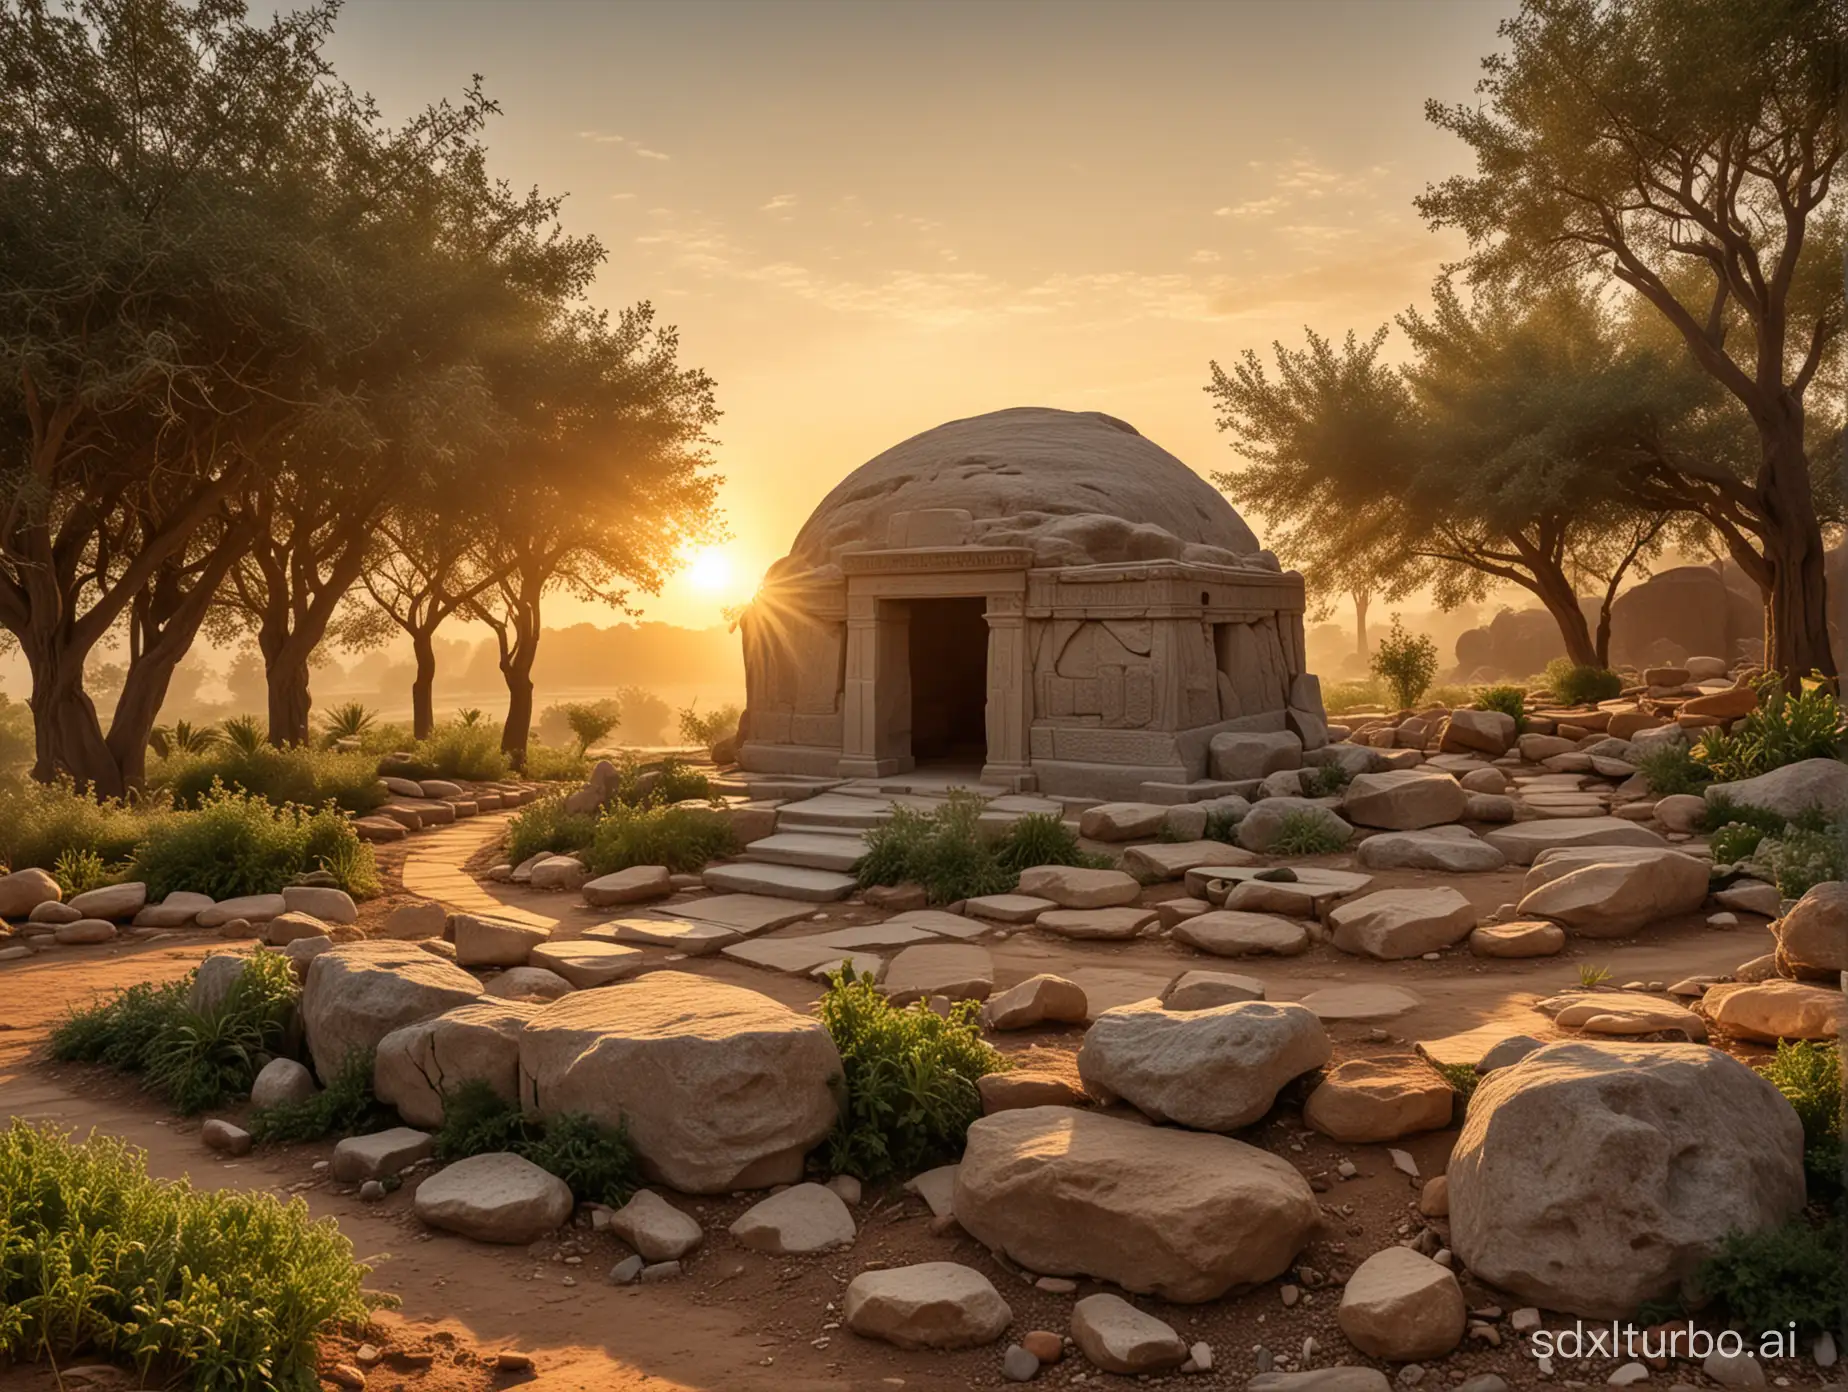 the picture of the tomb in the middle of the garden at the sunrise time and the big rock of tomb is placed aside making the tomb open , a great light is coming from the tomb(representing the resurrection from holy bible)